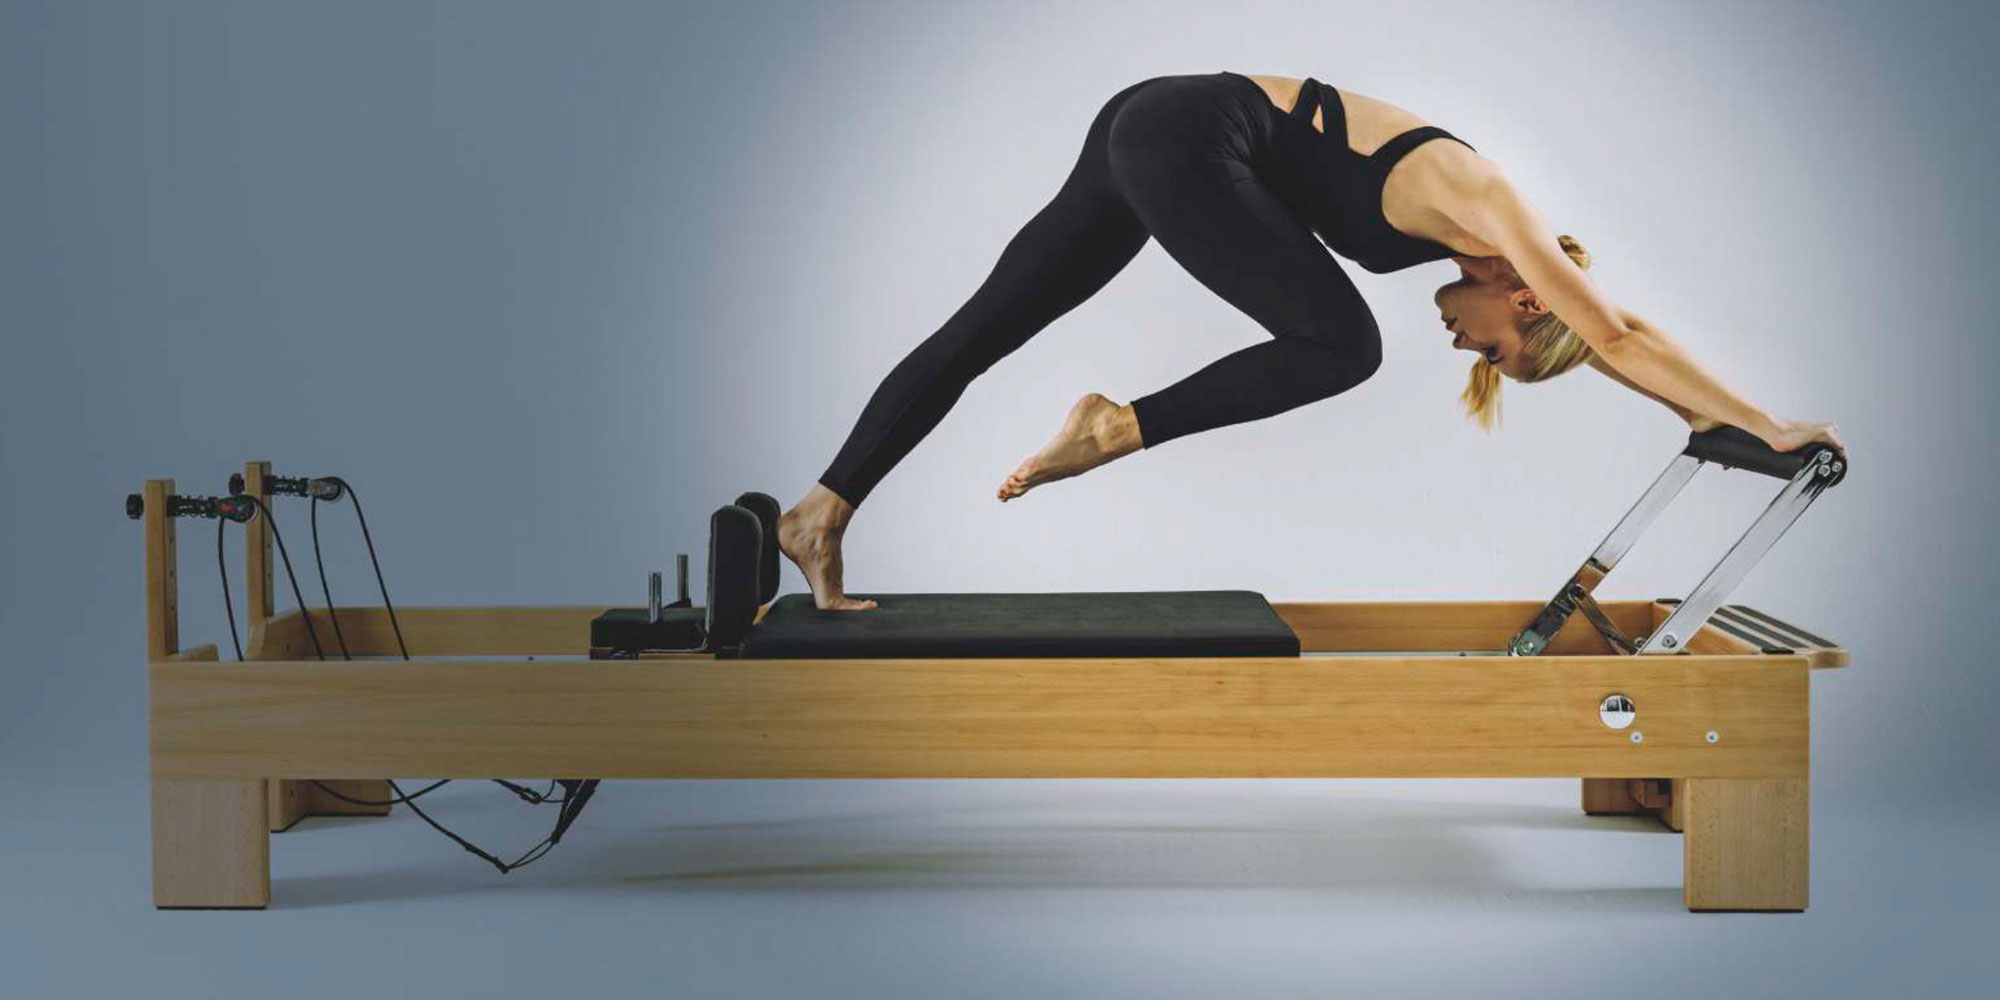 Apparatus Focus: What is the Pilates Reformer?